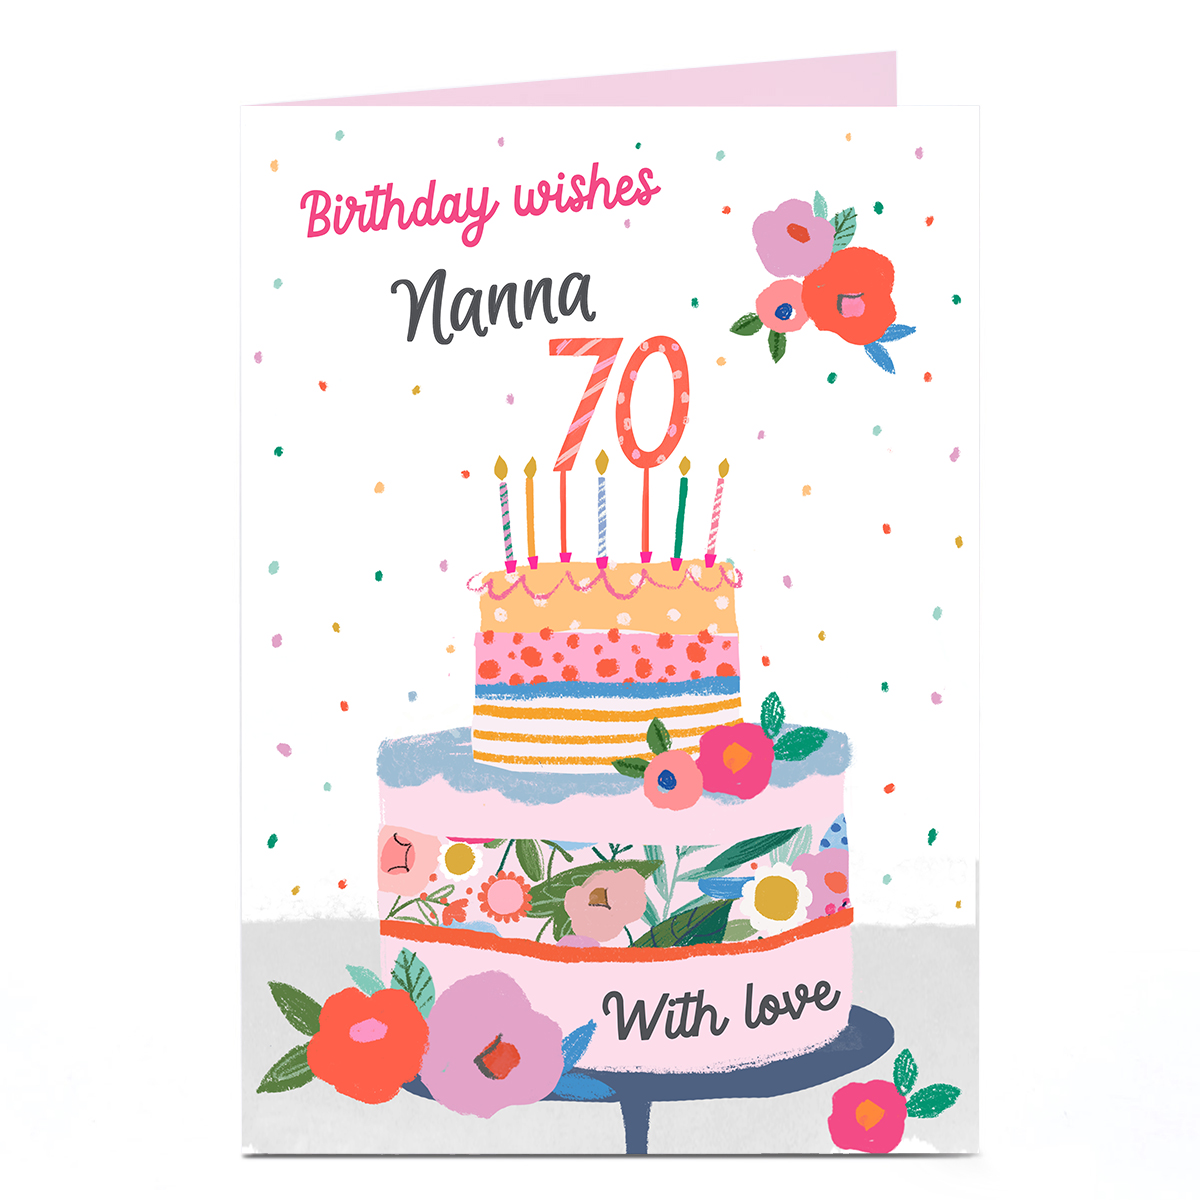 Buy Personalised 70th Birthday Card - Wishes With Love for GBP 1.79 ...